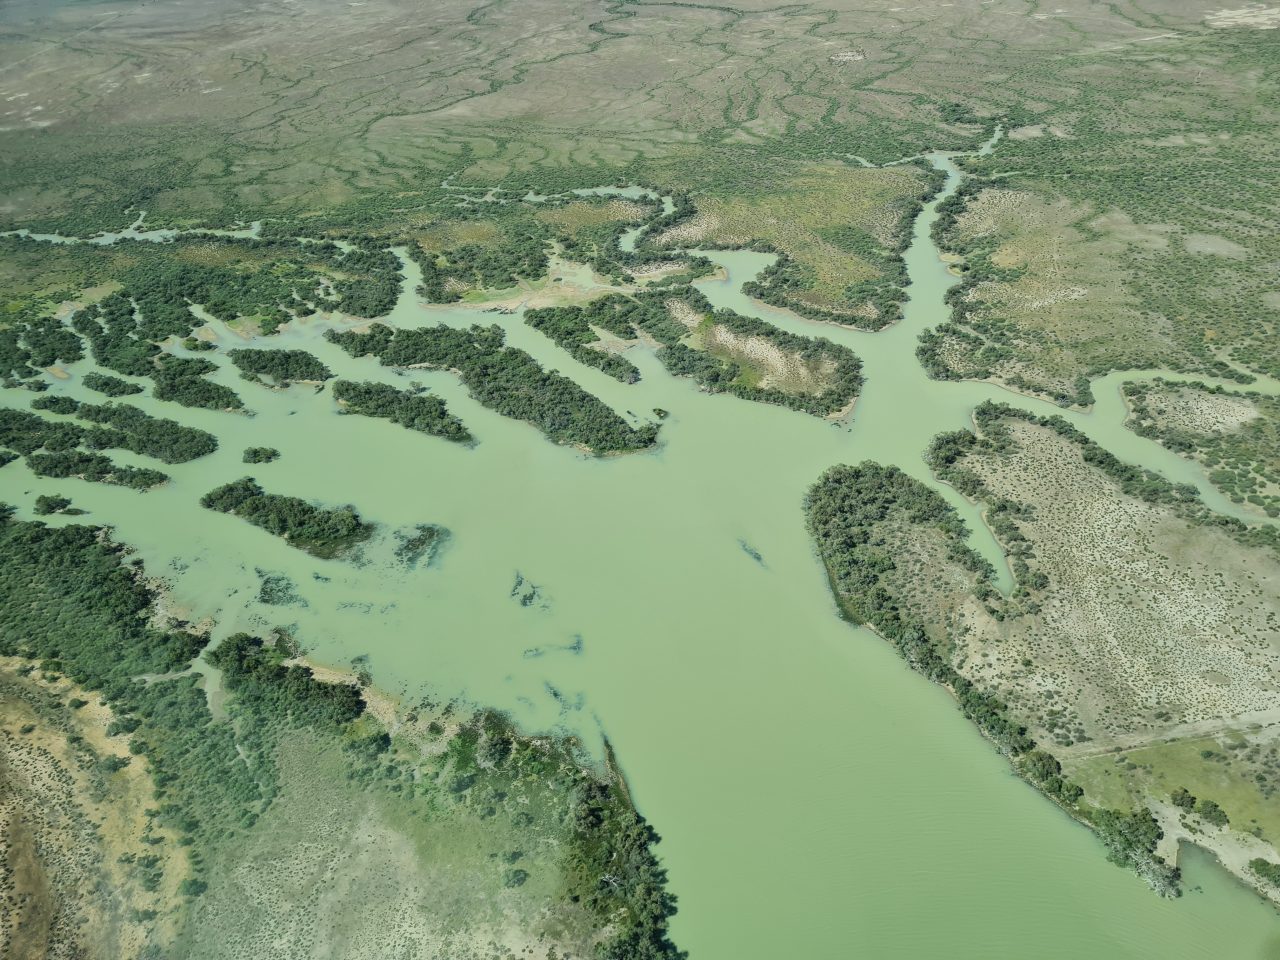 Aerial photo of light green water in creek runners combining into a larger flow that is lined with trees and has smaller vegetated islands at the top of the flow until they run out and the water surface takes over. The floodplain in the background has tree lined creek runners meandering across it in long dark green tendrils